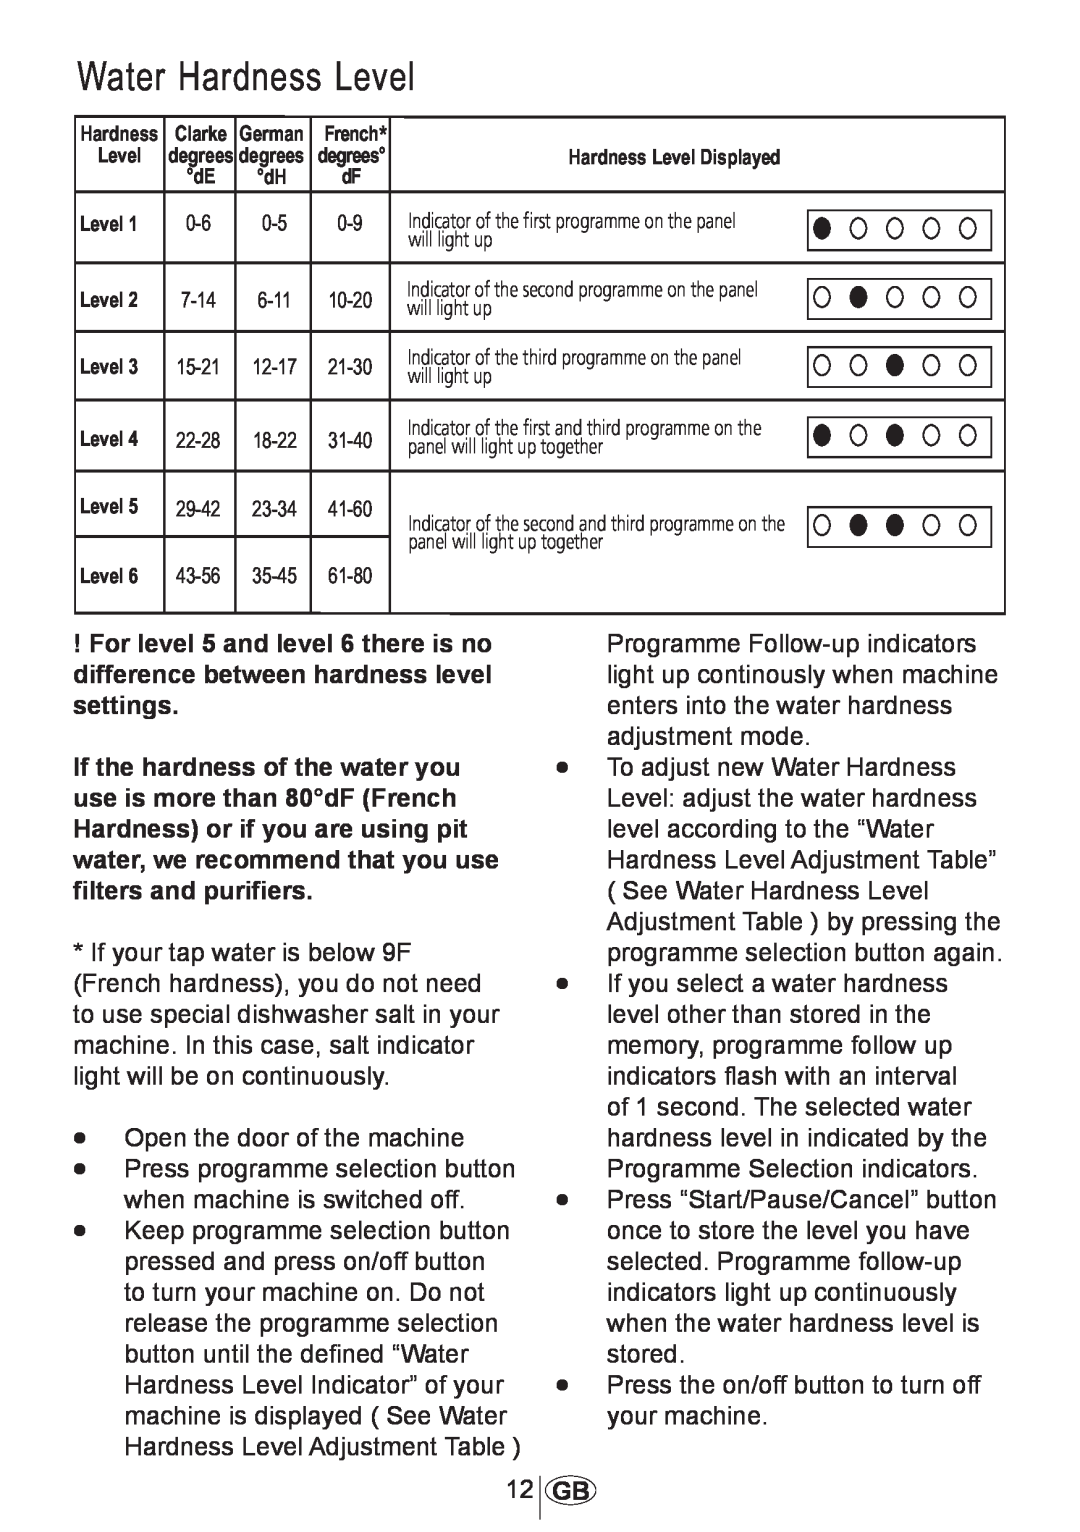 Beko DW602 manual For level 5 and level 6 there is no difference between hardness level settings 